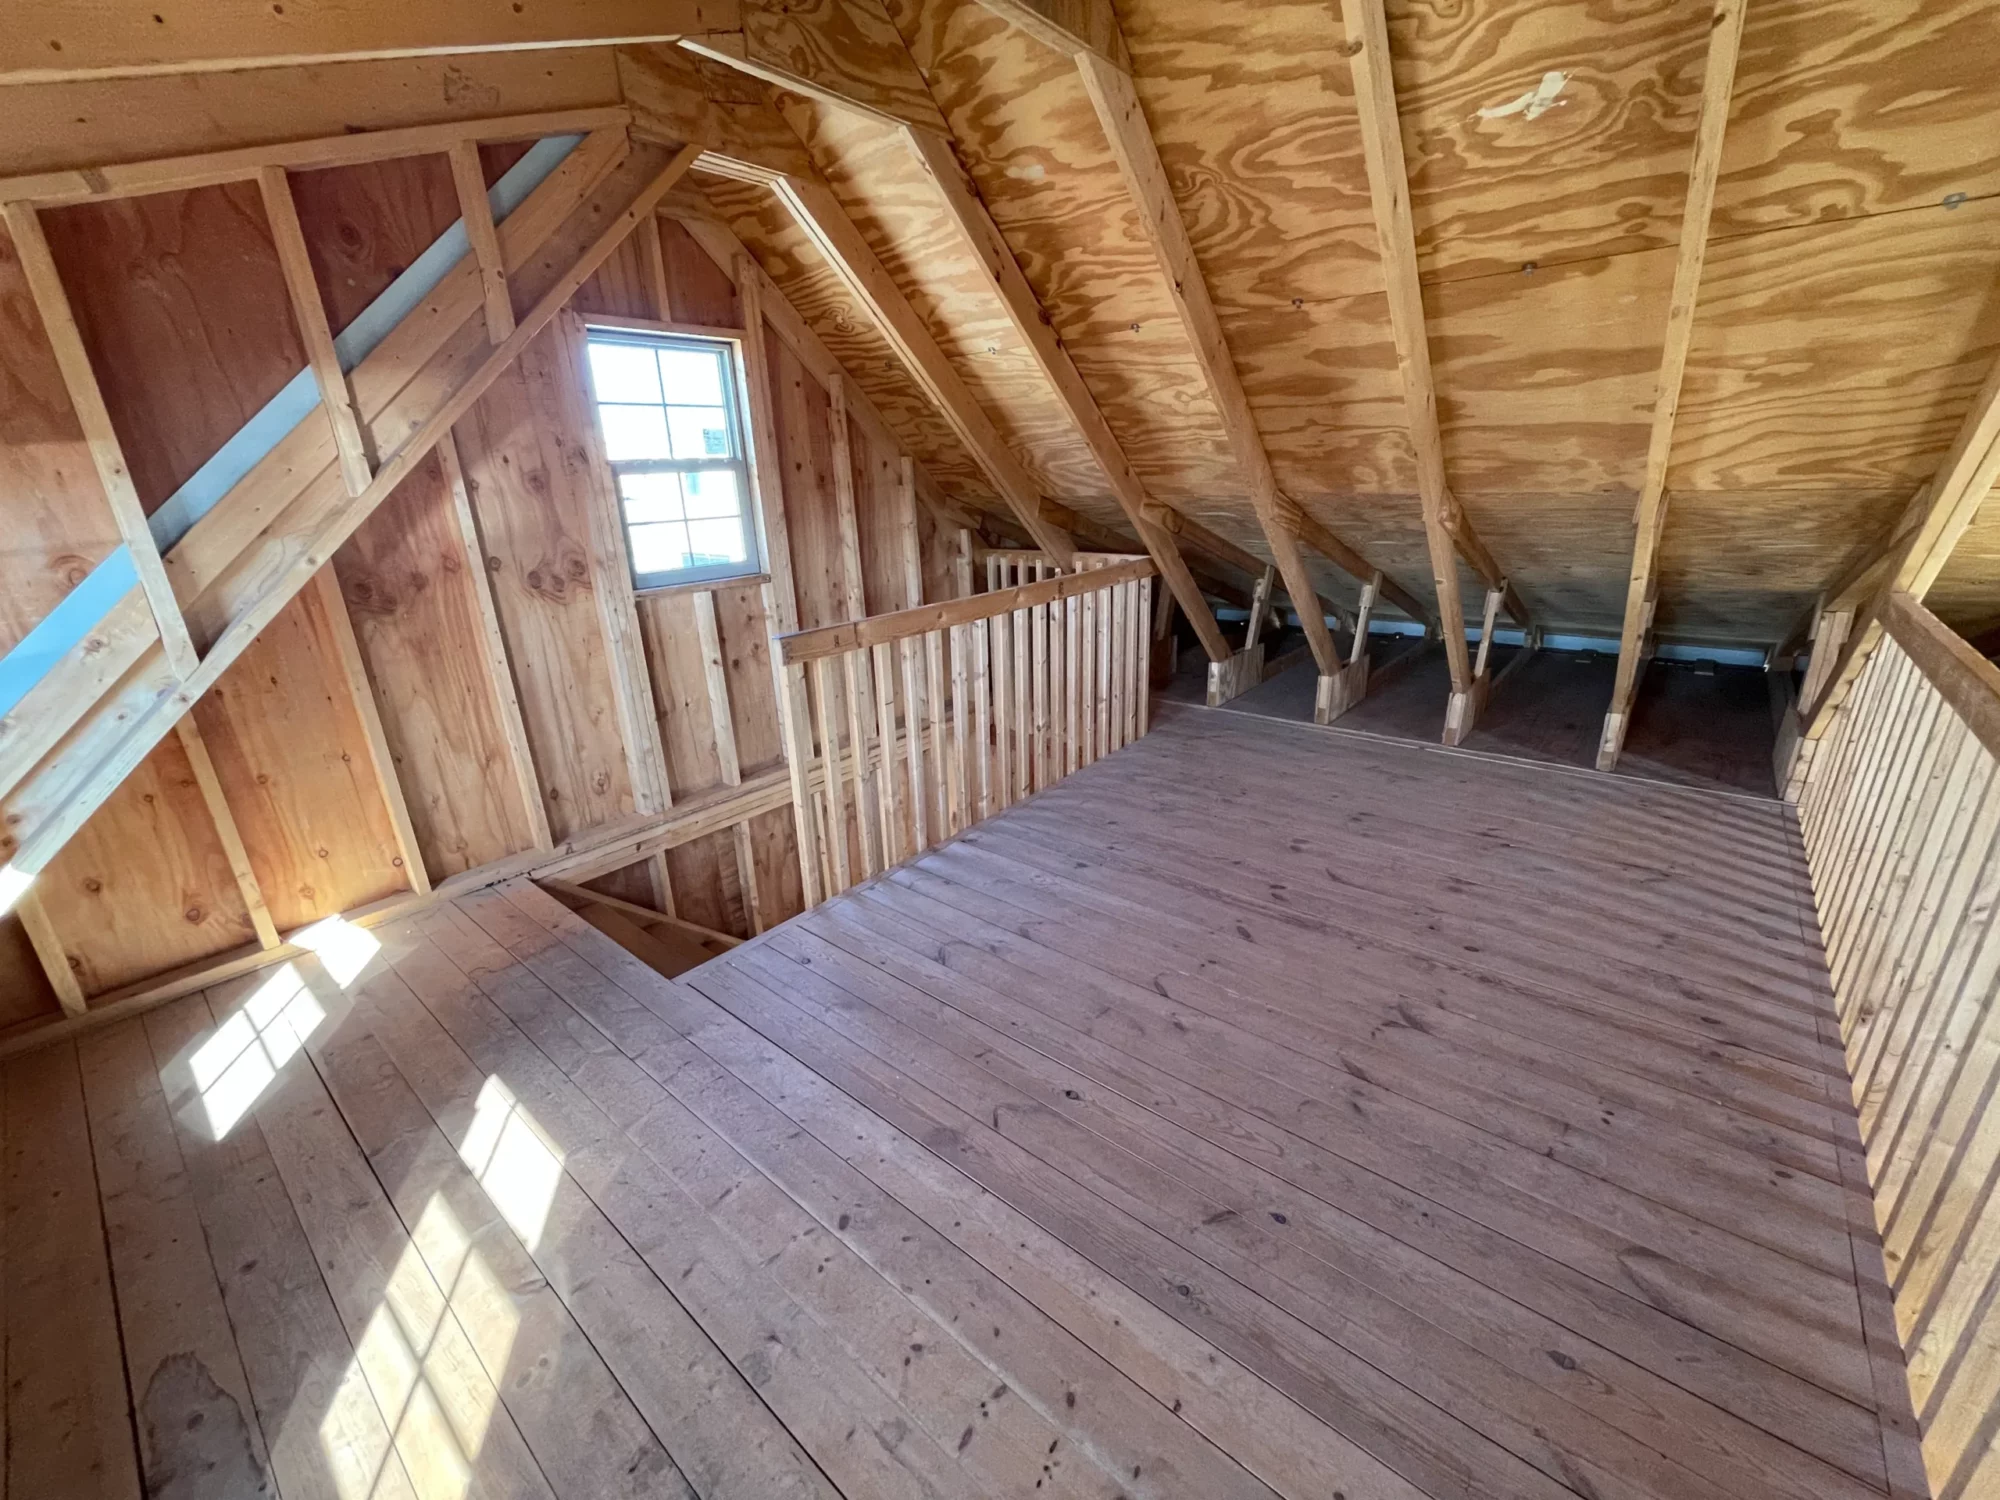 two story cabin – upstairs loft